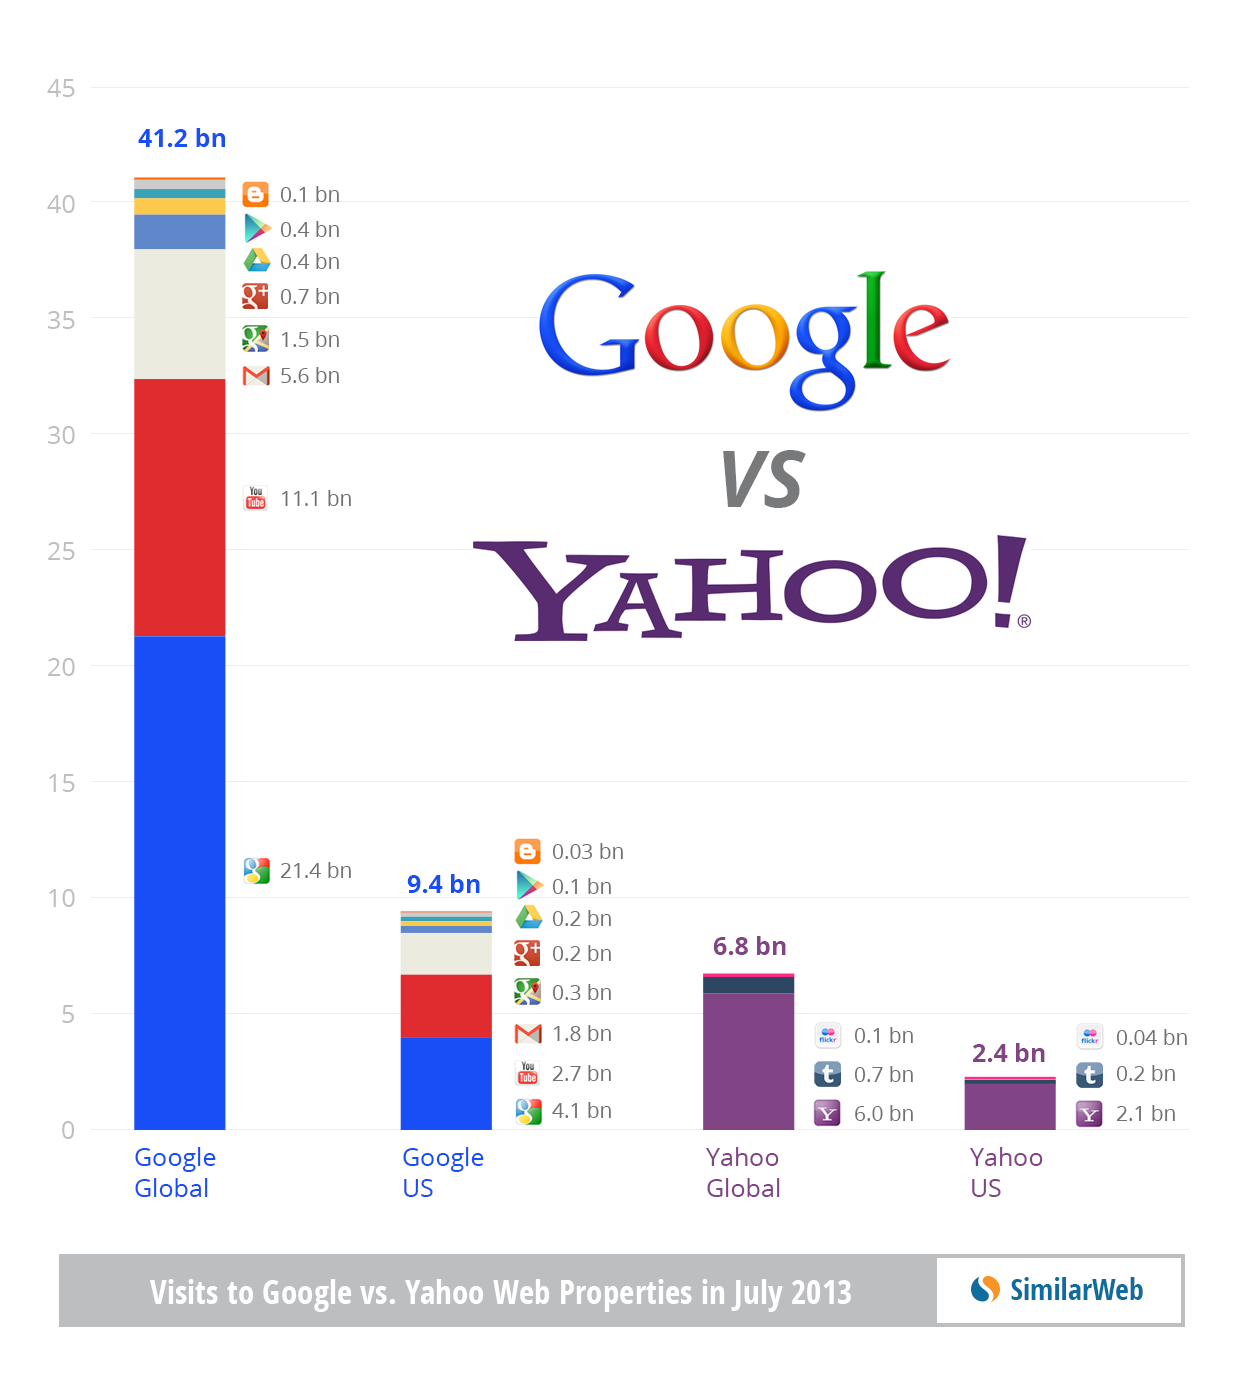 Yahoo and Facebook gang up against Google